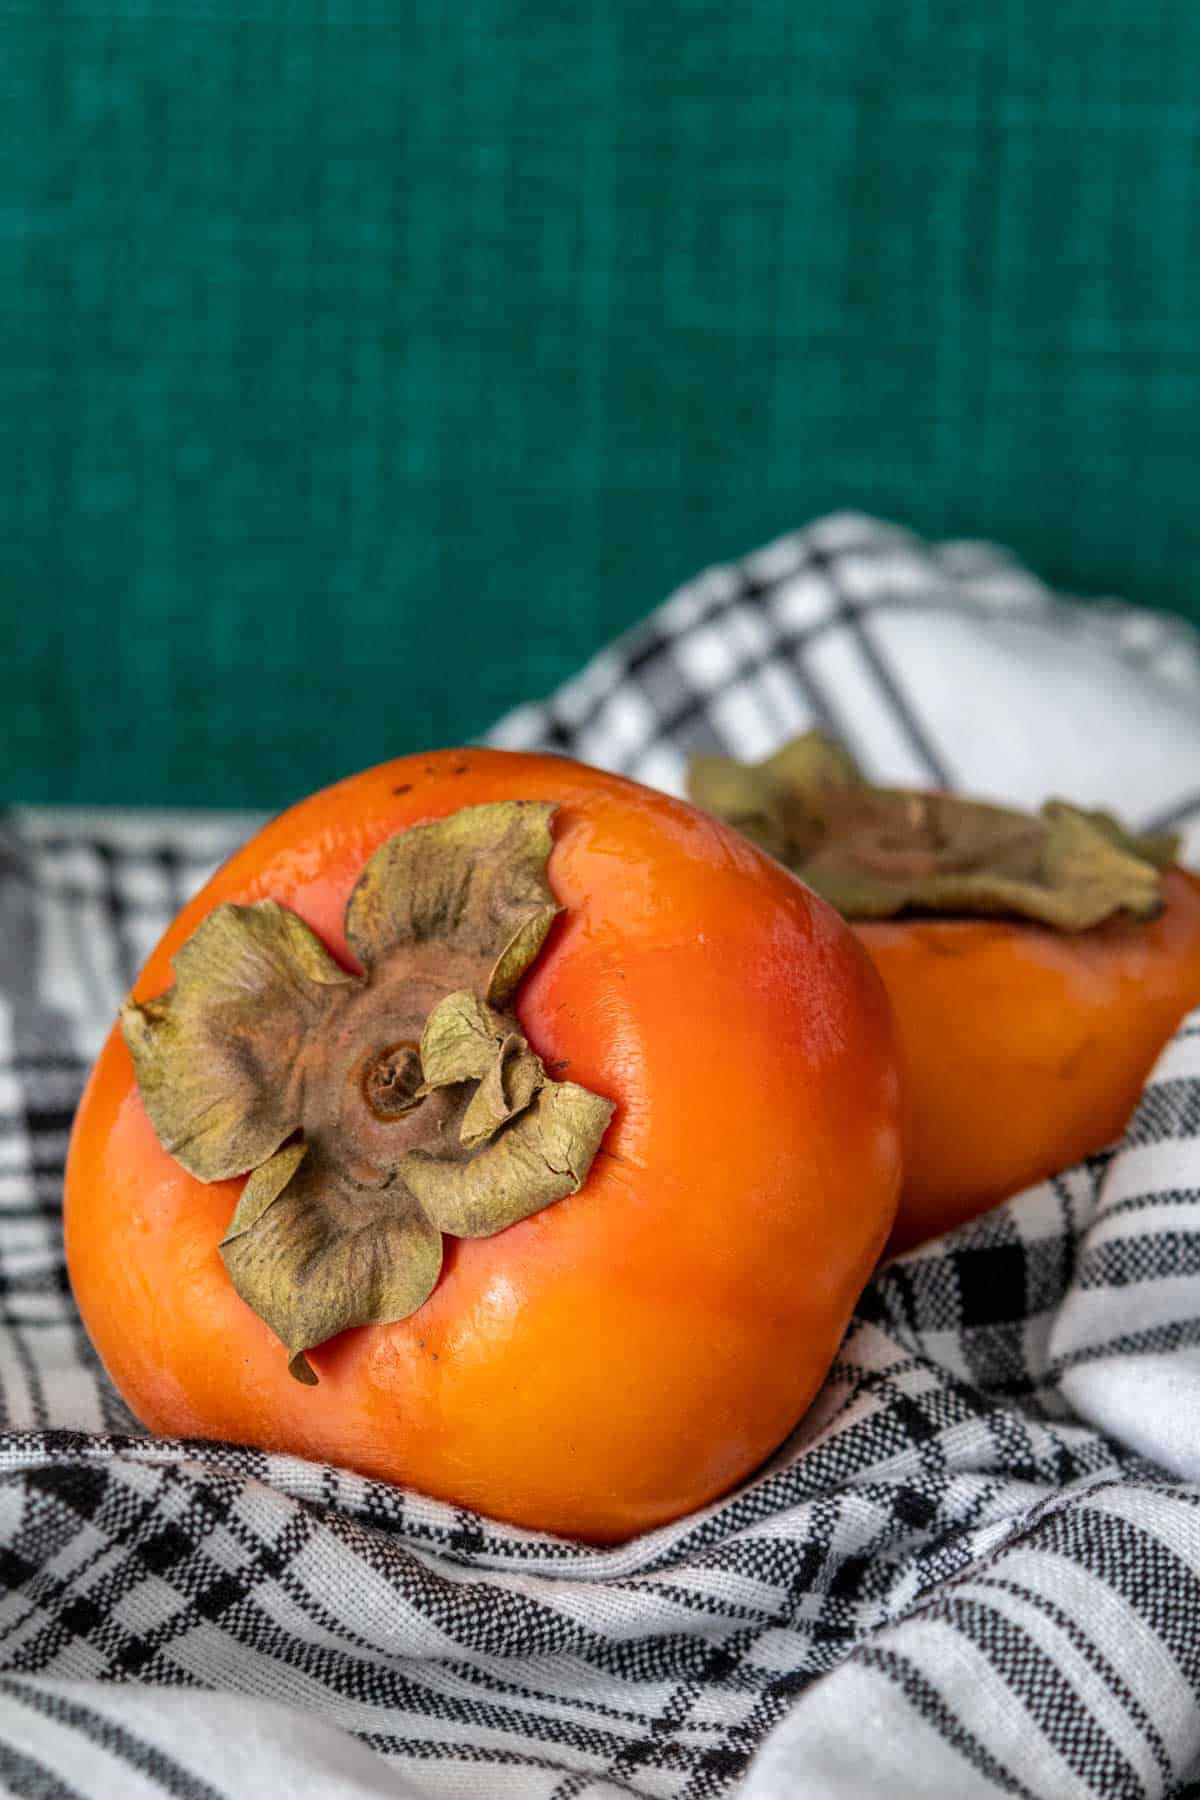 Persimmons on a black and white plaid napkin with a green wall behind.